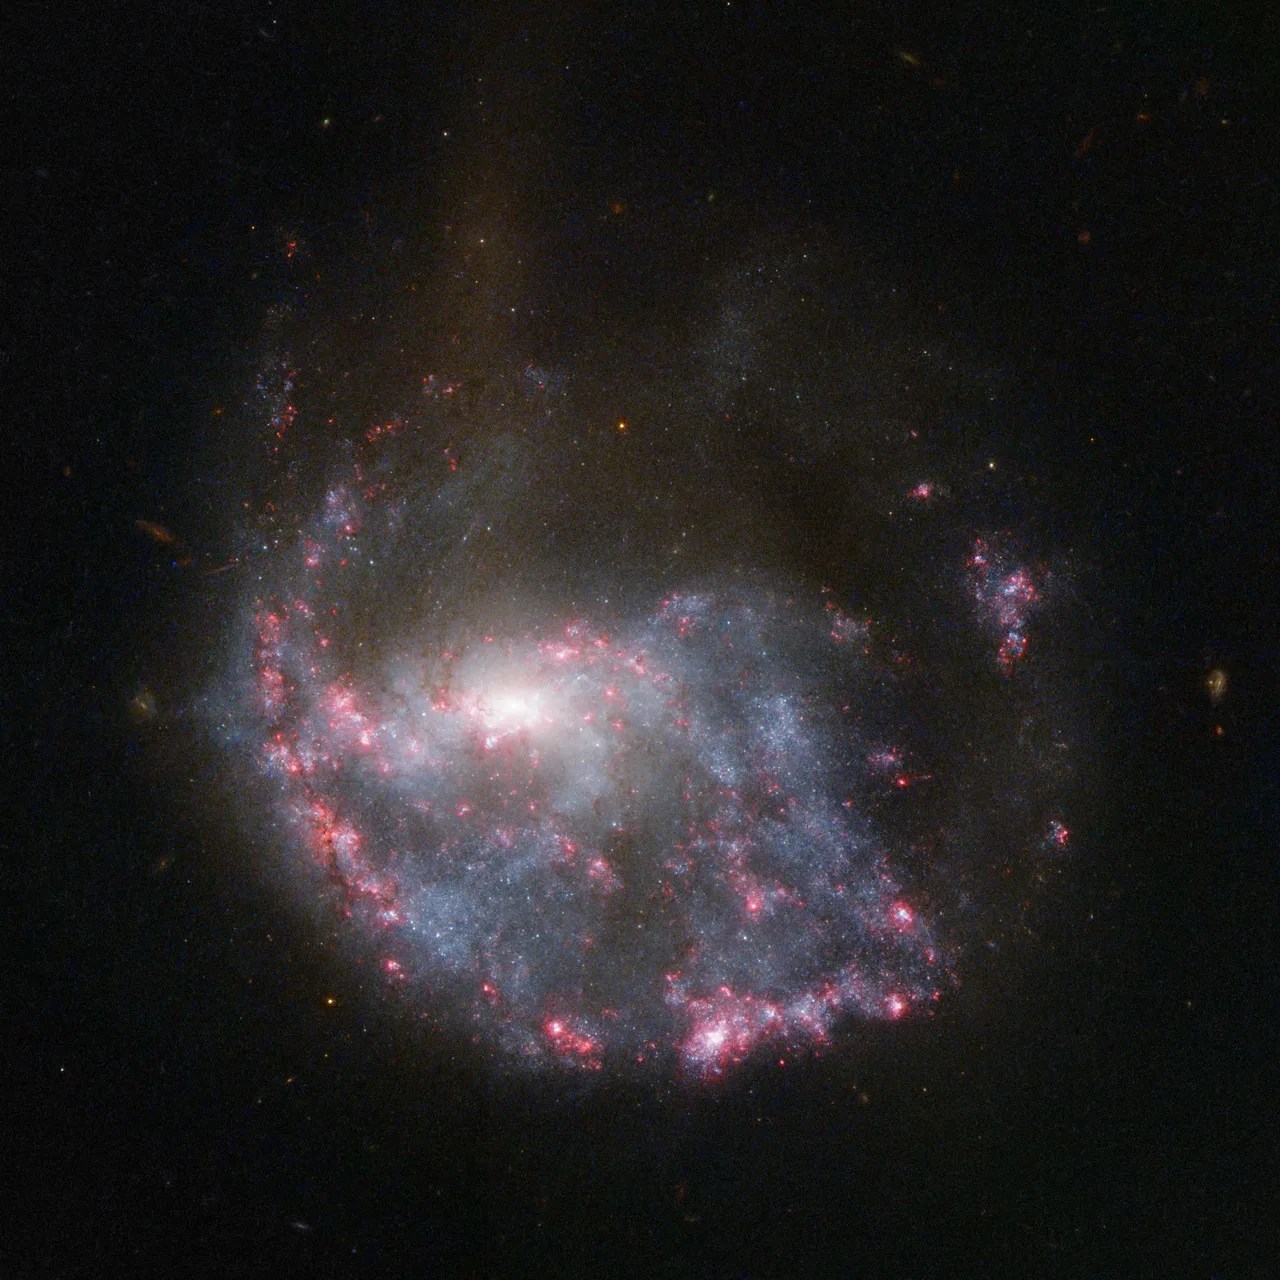 Bright pink nebulae almost completely encircle a spiral galaxy in this NASA ESA Hubble Space Telescope image of NGC 922.